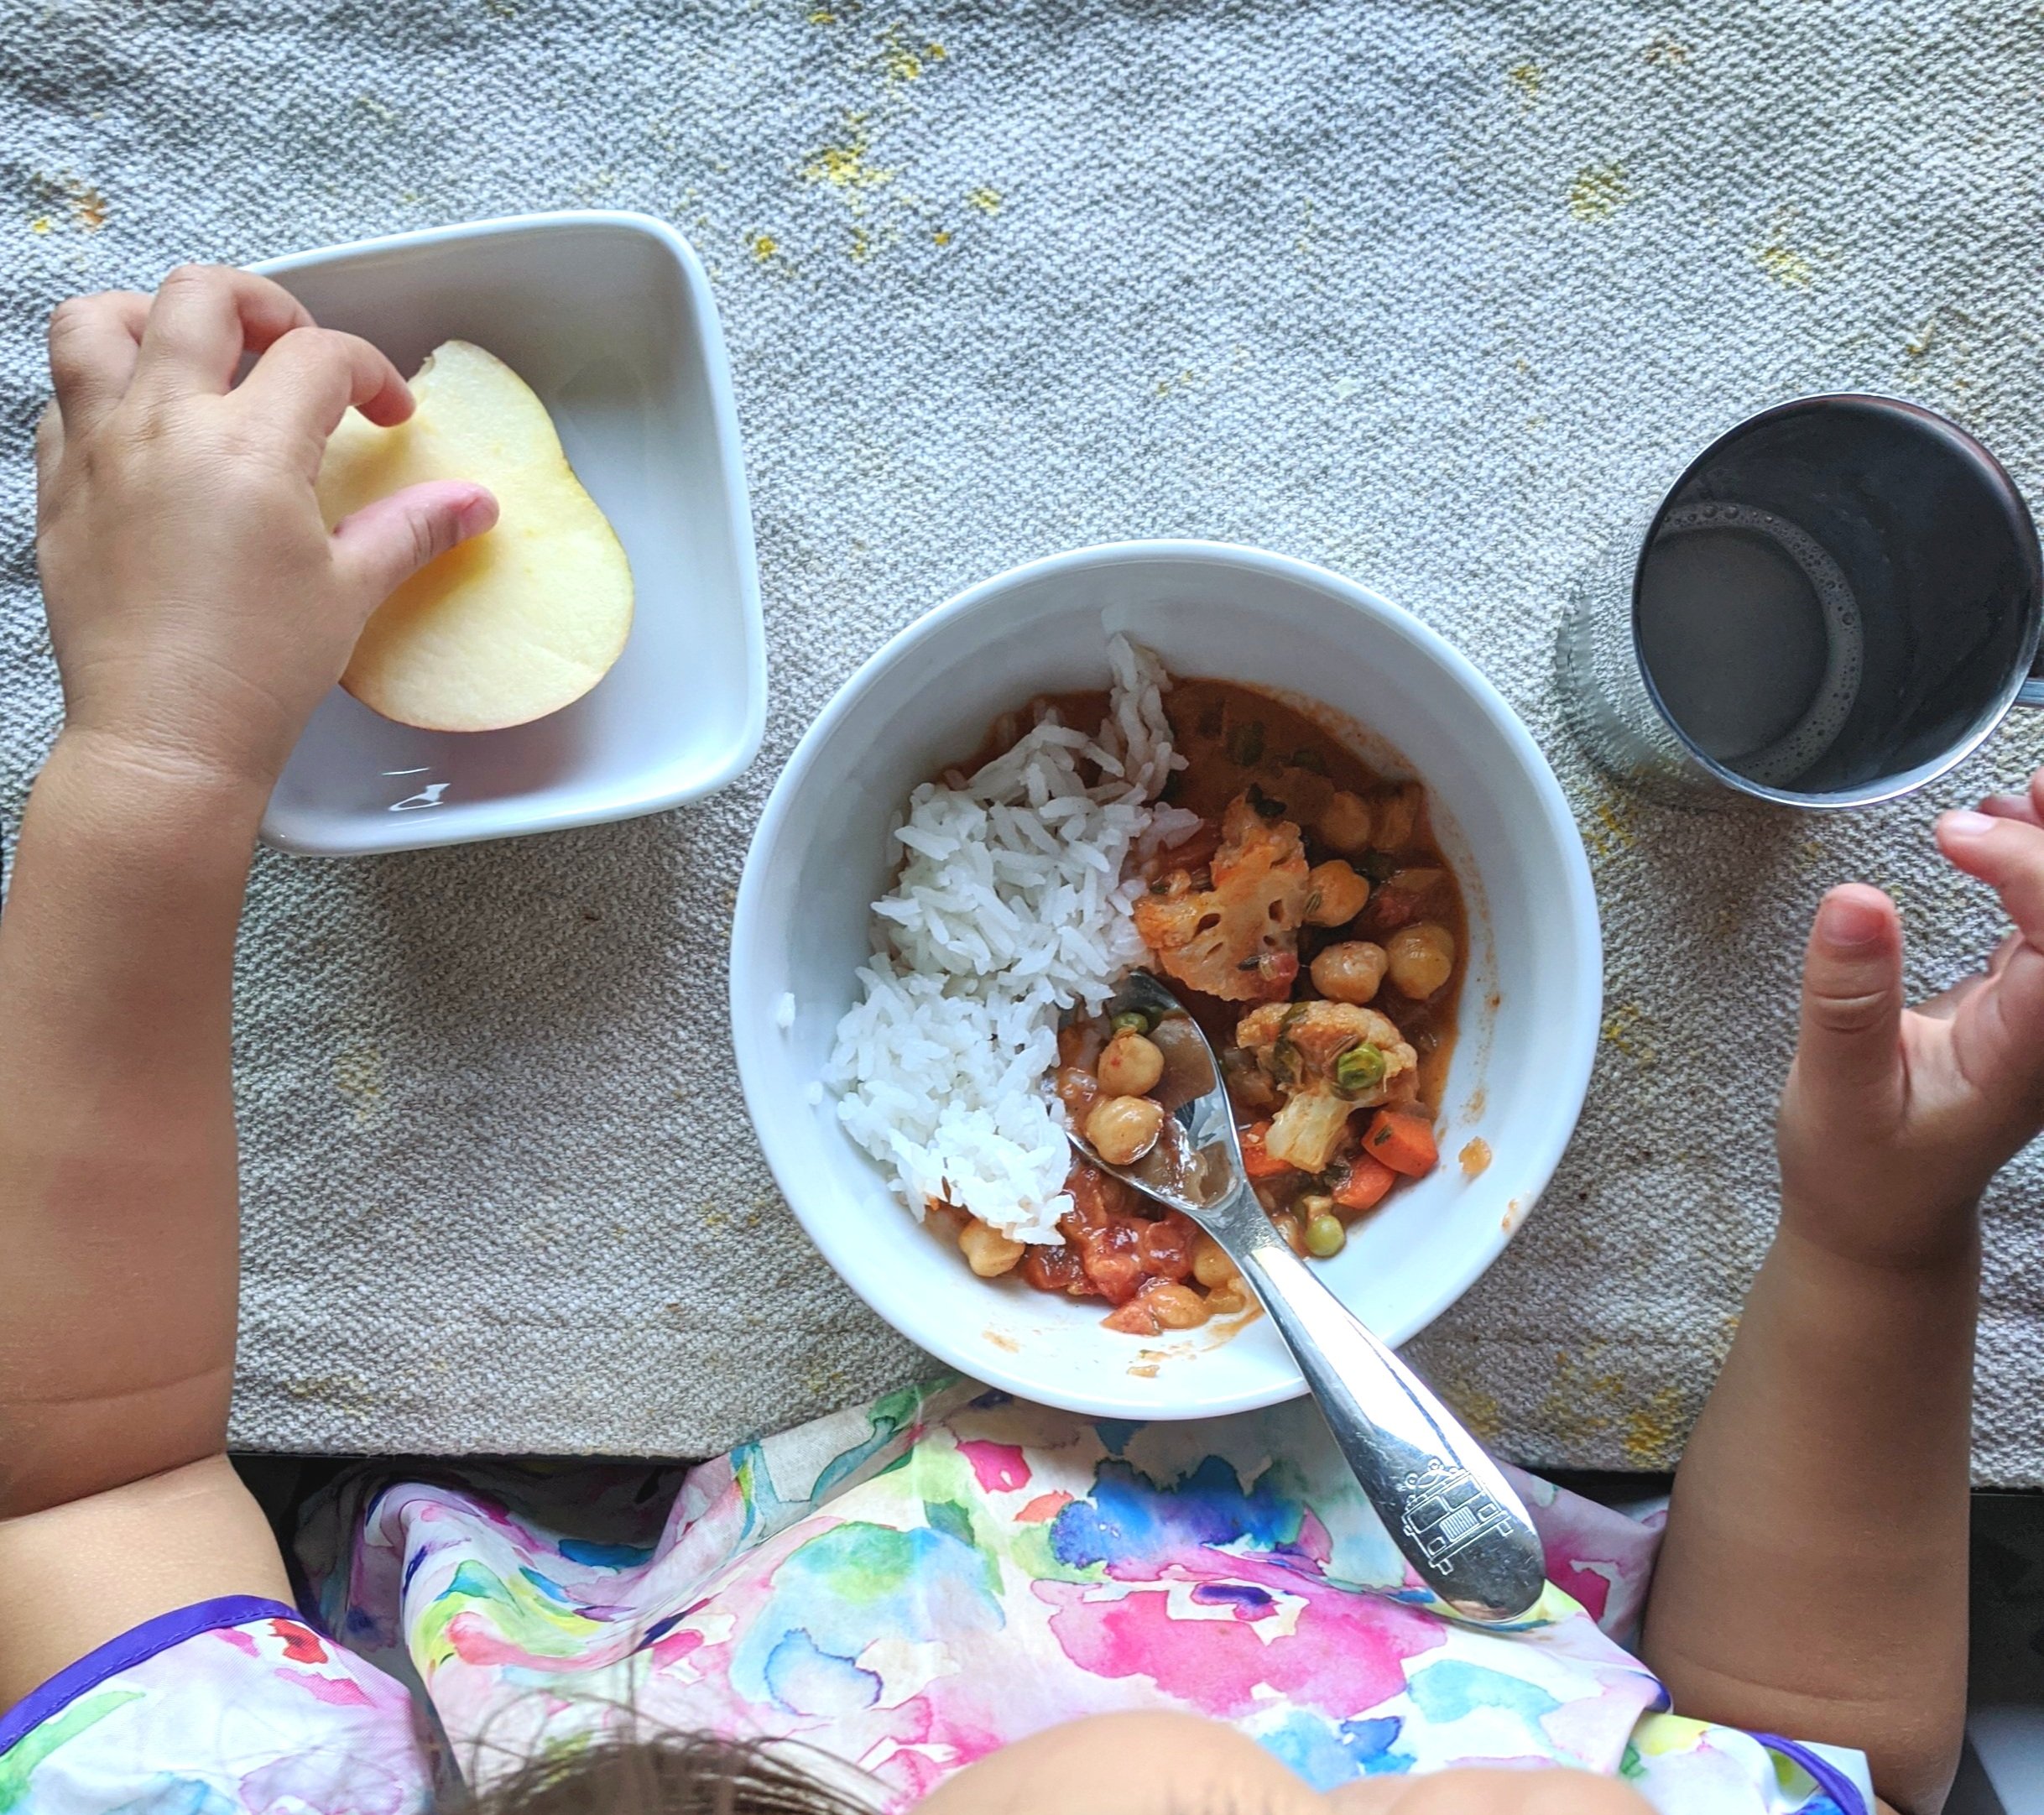 Sample Vegan Toddler Meals and Snacks for My 2 Year-old